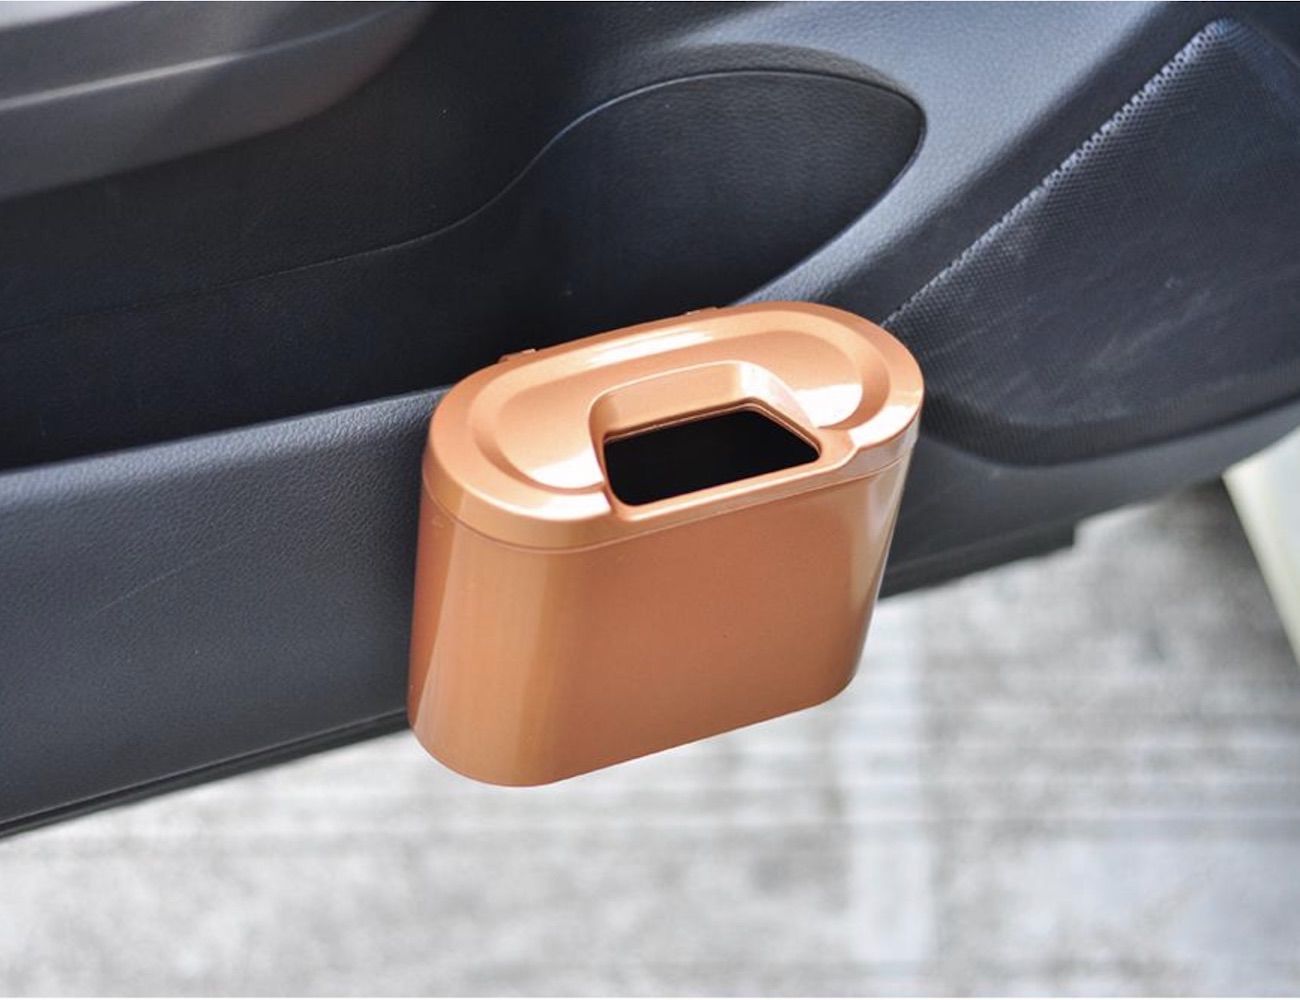 Vehicle Trash Can Universal Car Garbage Bin keeps all your trash in one place